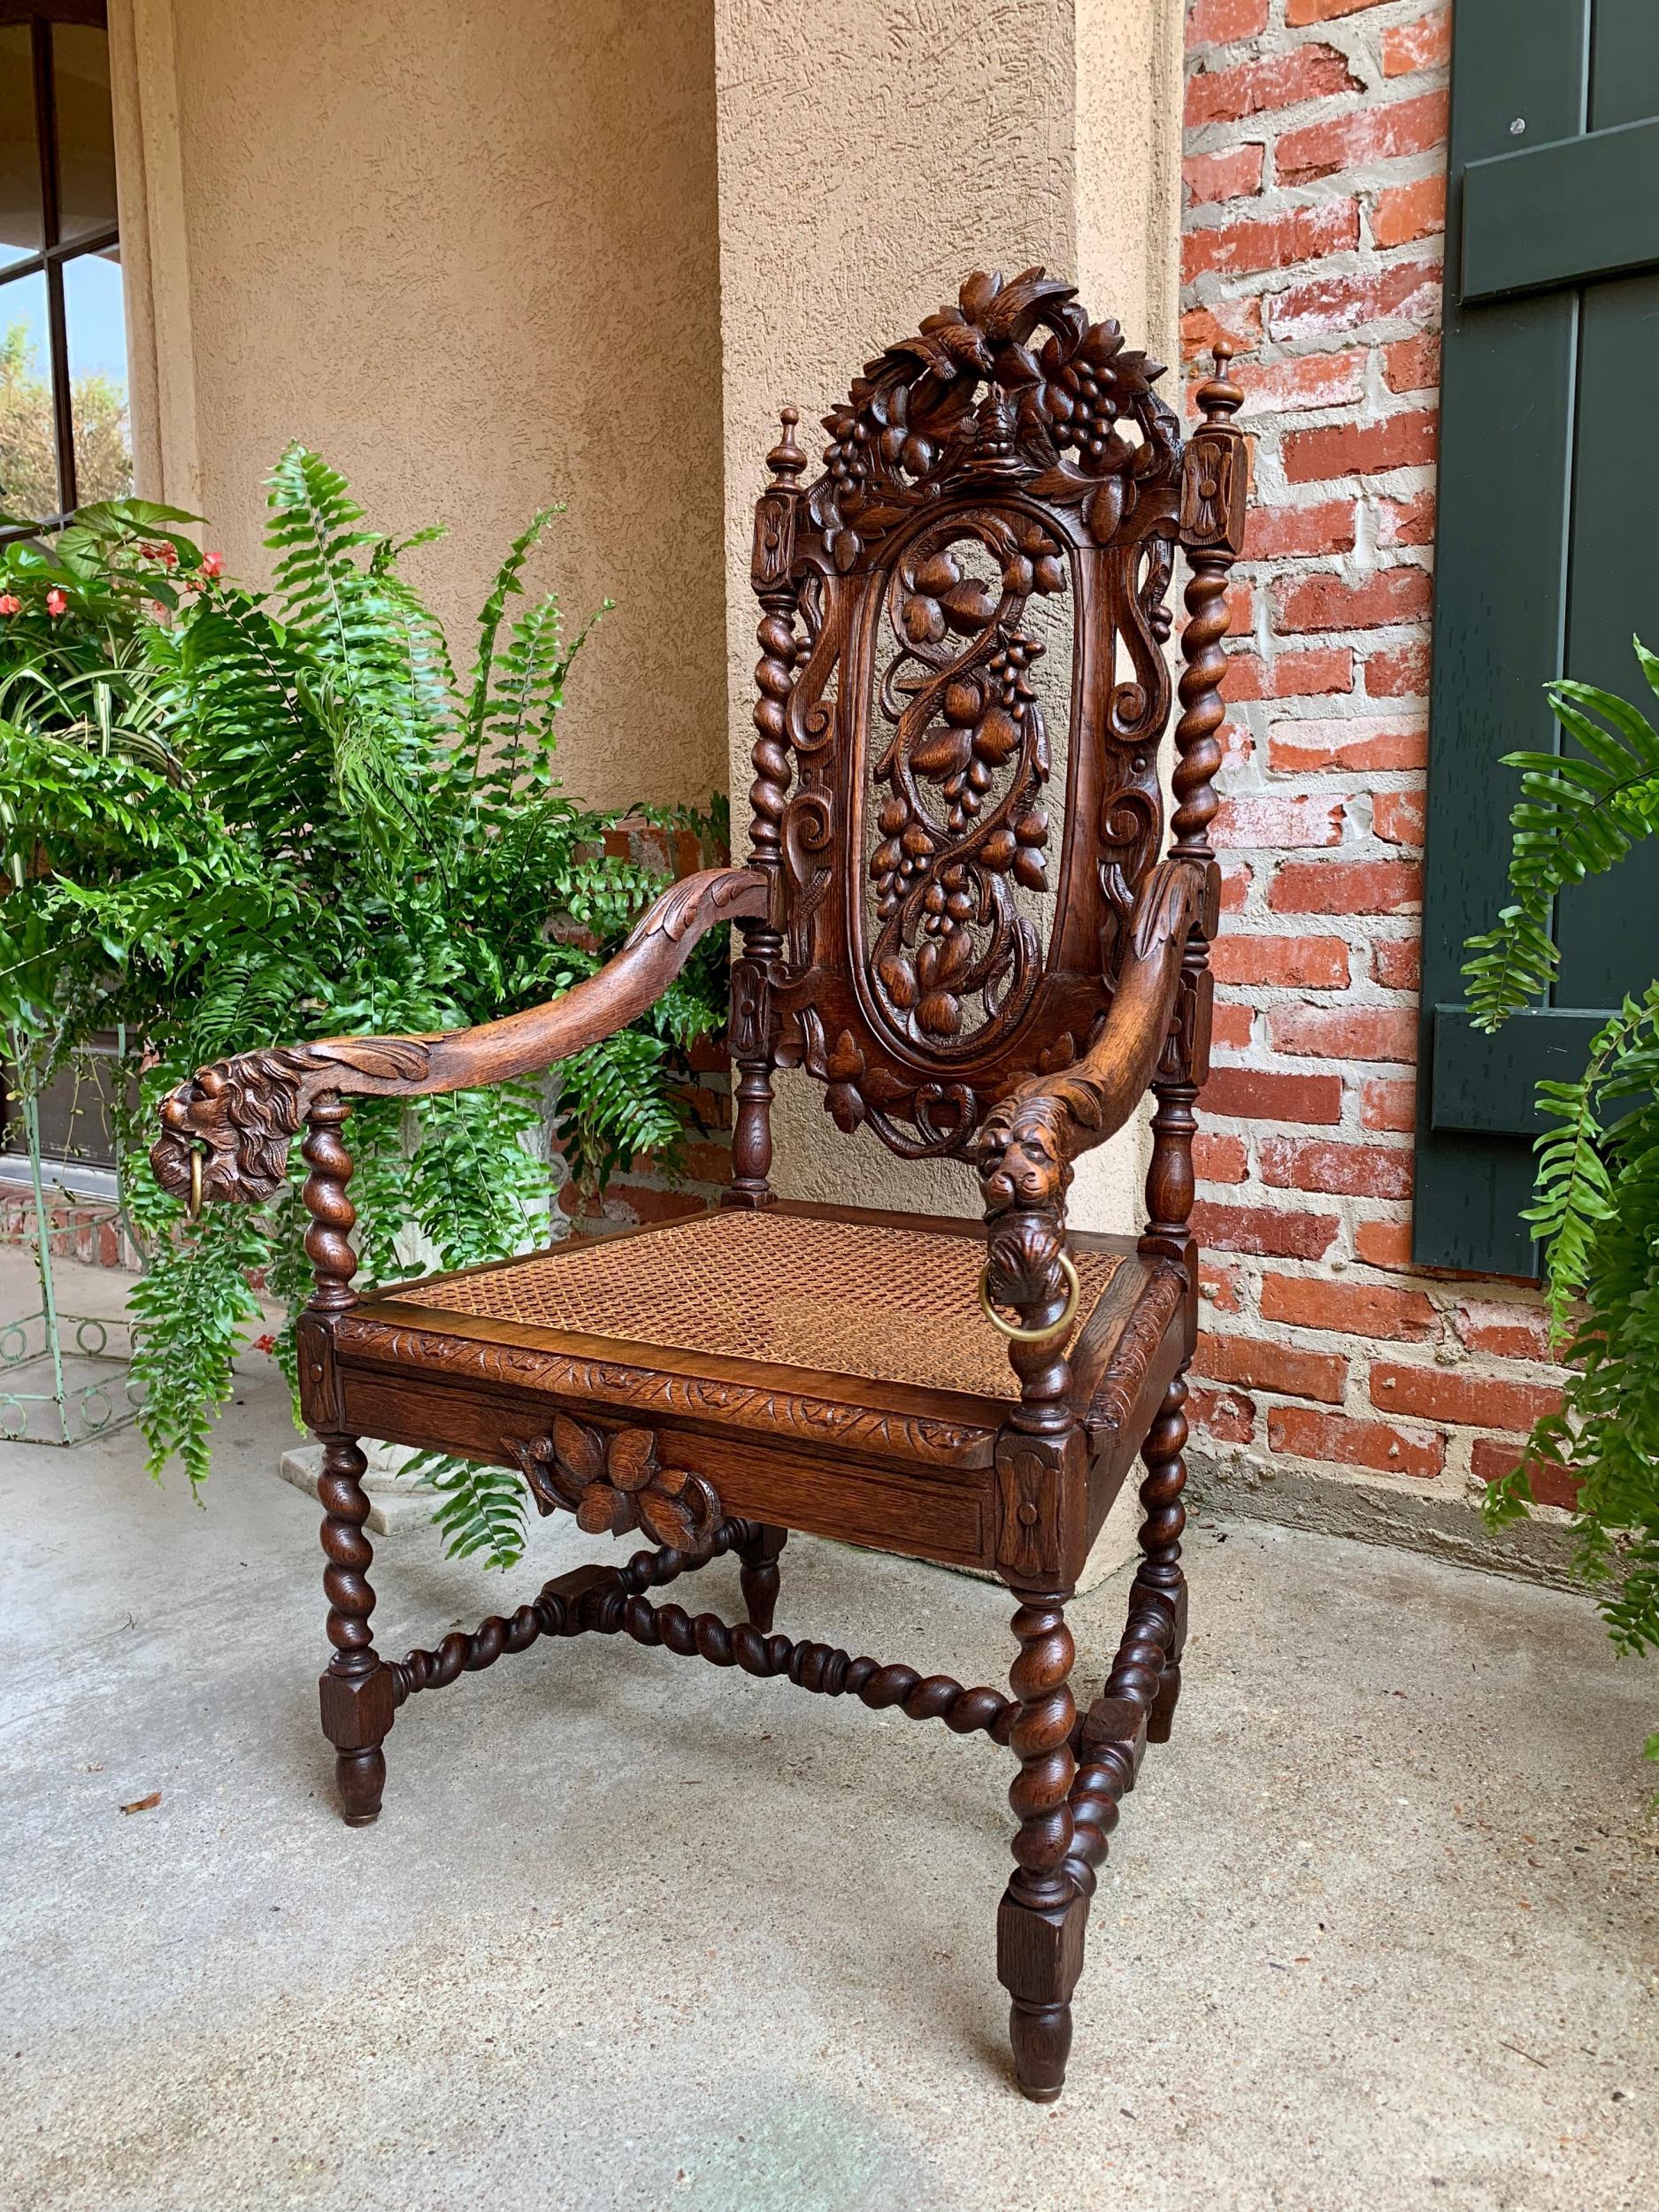 Caning Antique French Carved Oak Throne Arm Chair Barley Twist Renaissance Louis XIII